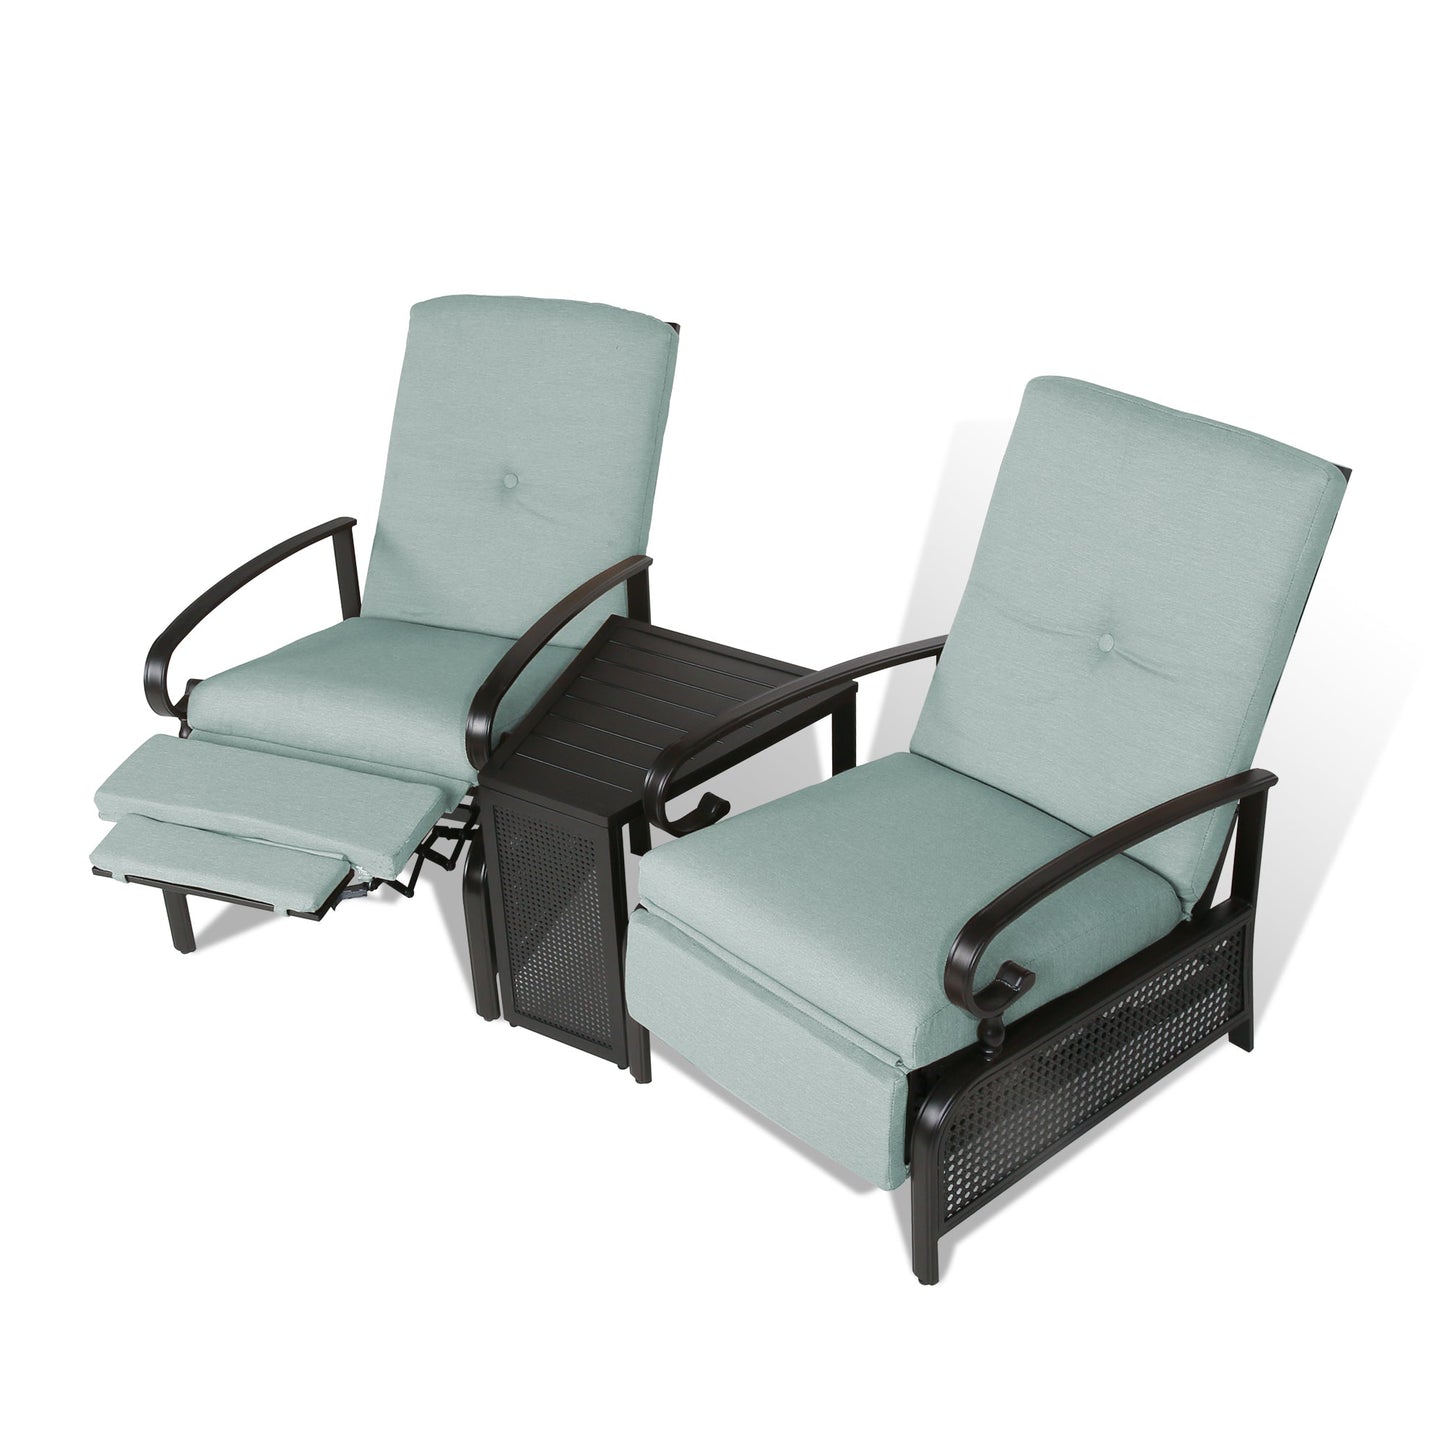 3 Pieces Outdoor /Indoor Recliner Set and Steel Side Table, Patio Furniture set Conversation Set with 2 Adjustable Reclining Lounge Chairs and Olefin Cushions（Mist）